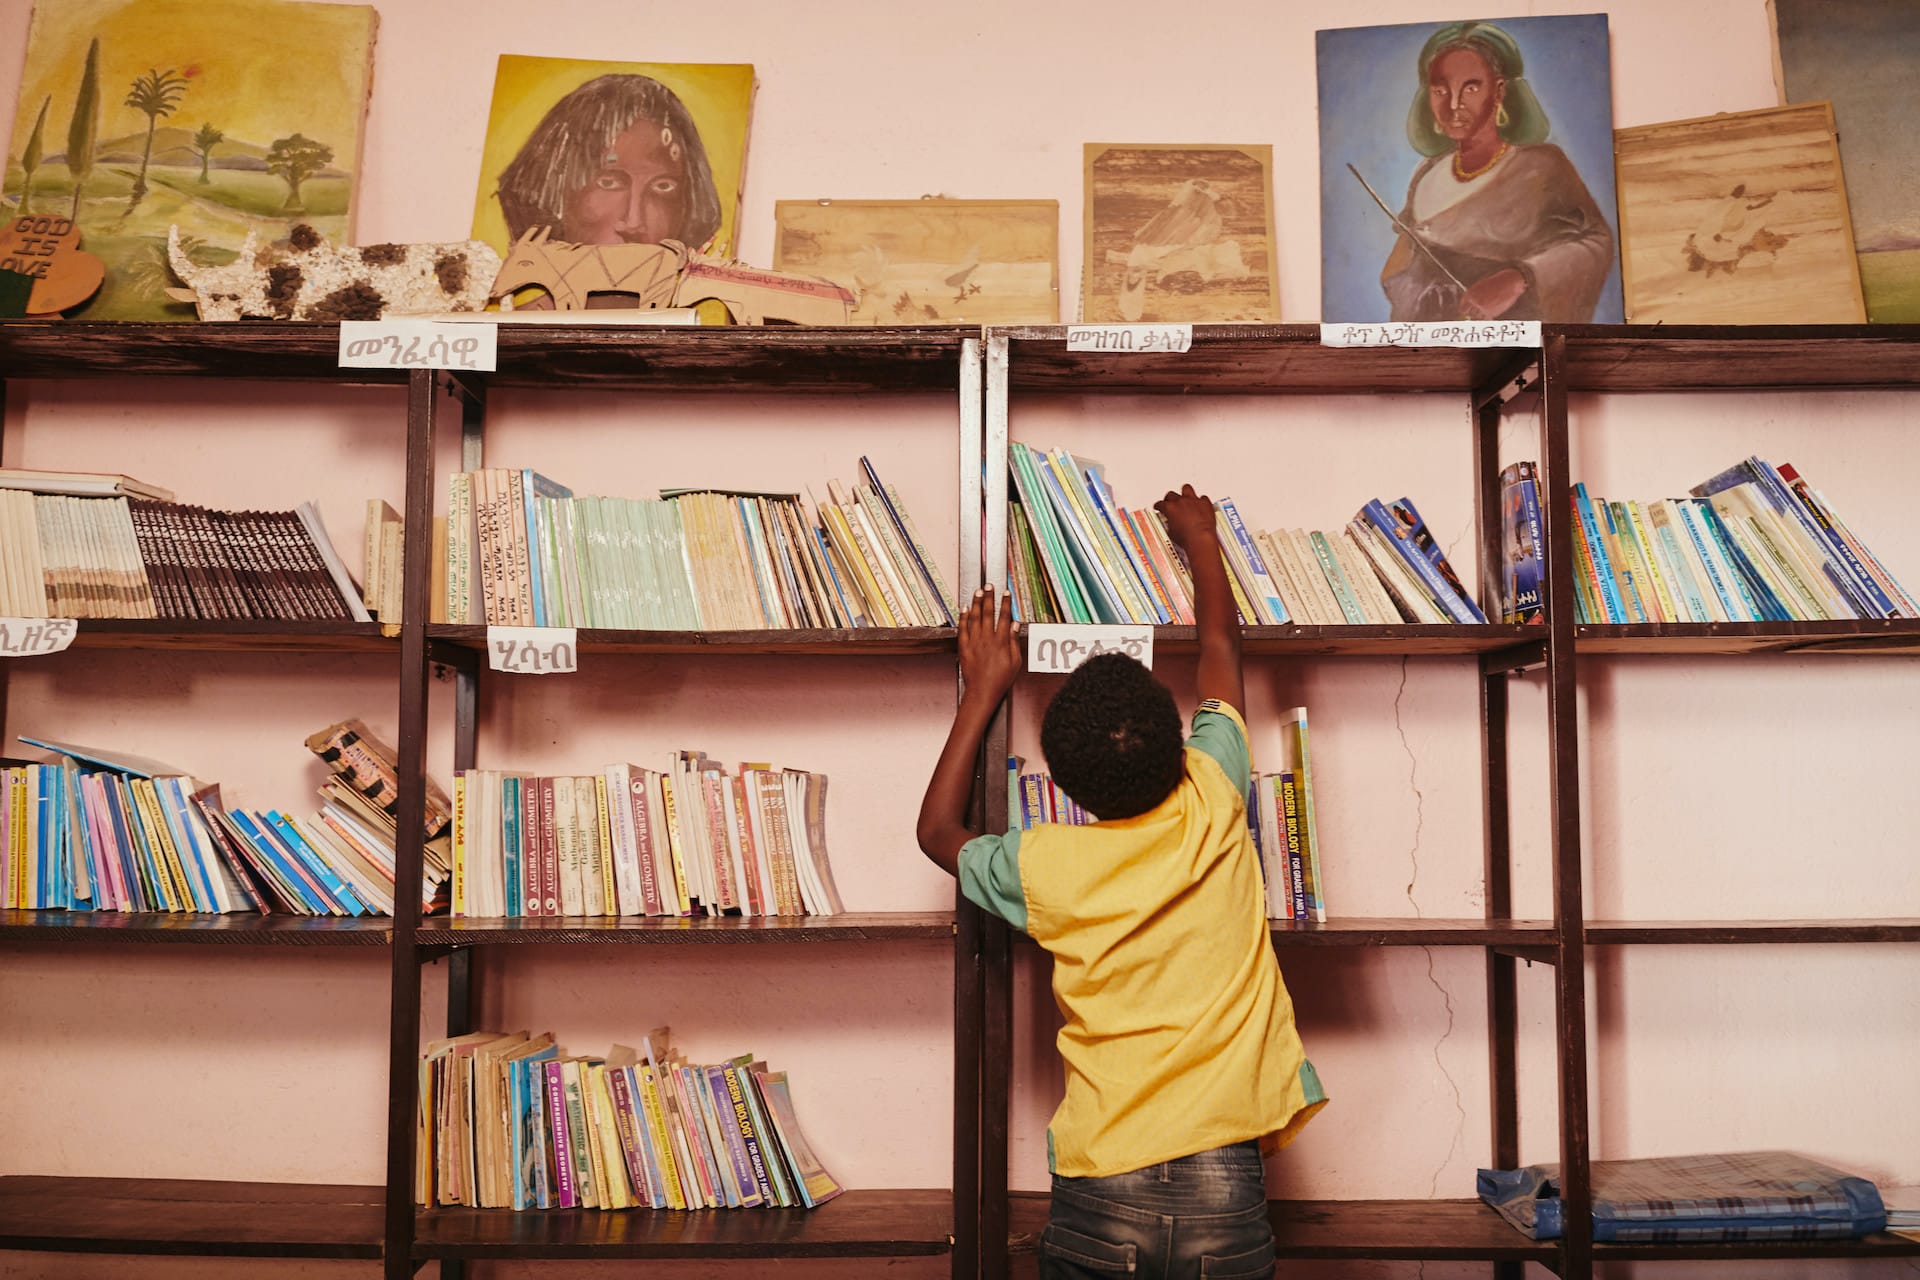 a child reaches for a book on a bookshelf.